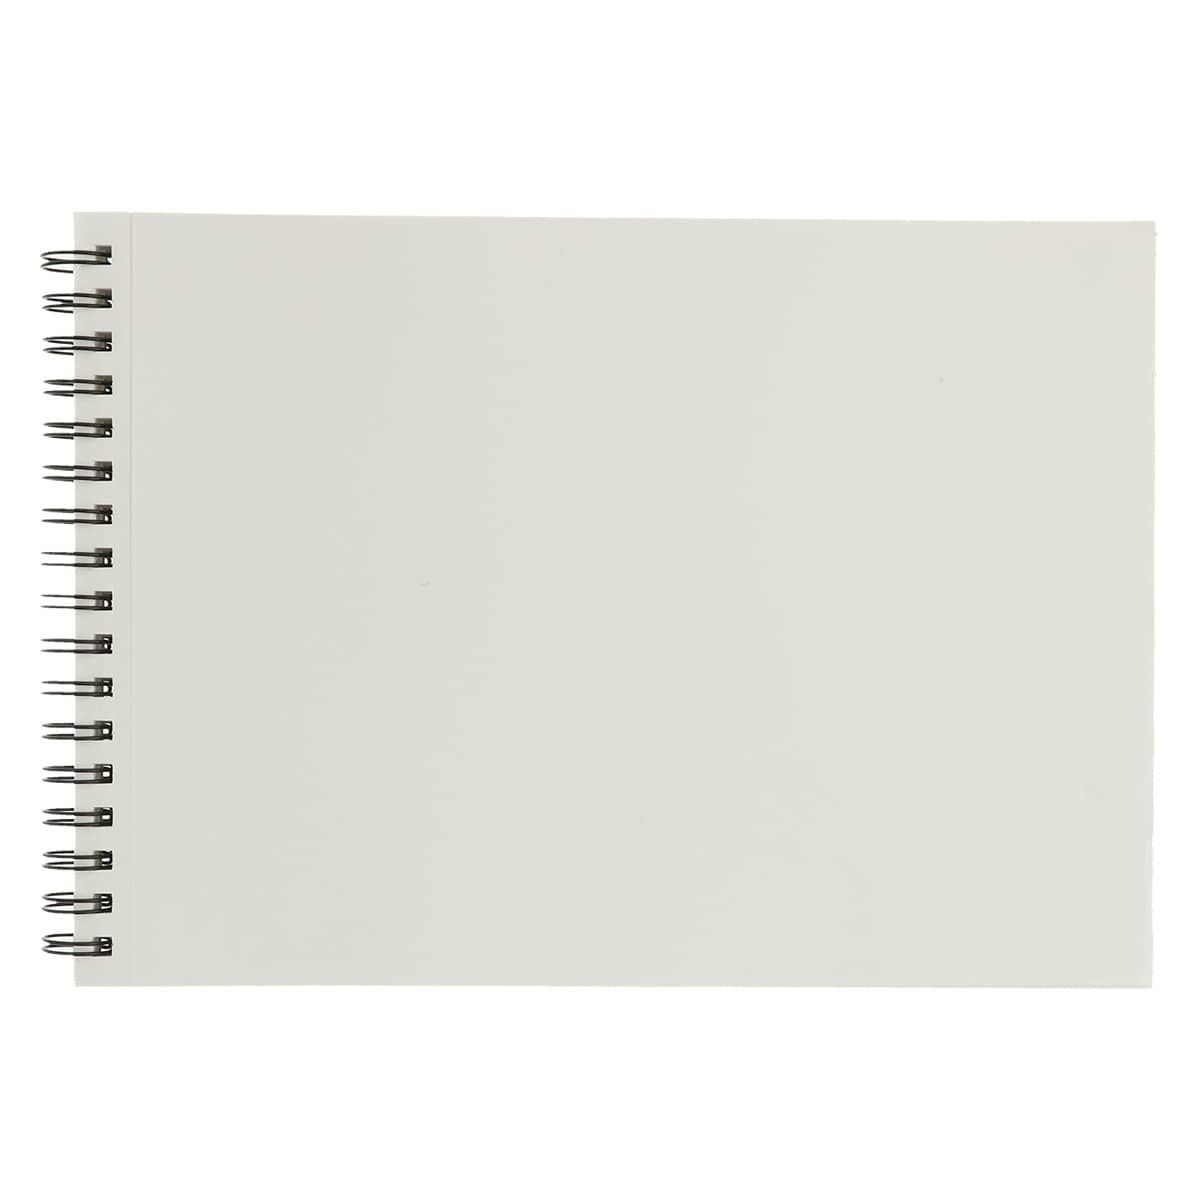 Fabriano Spiral-Bound Landscape Drawing Book - Black